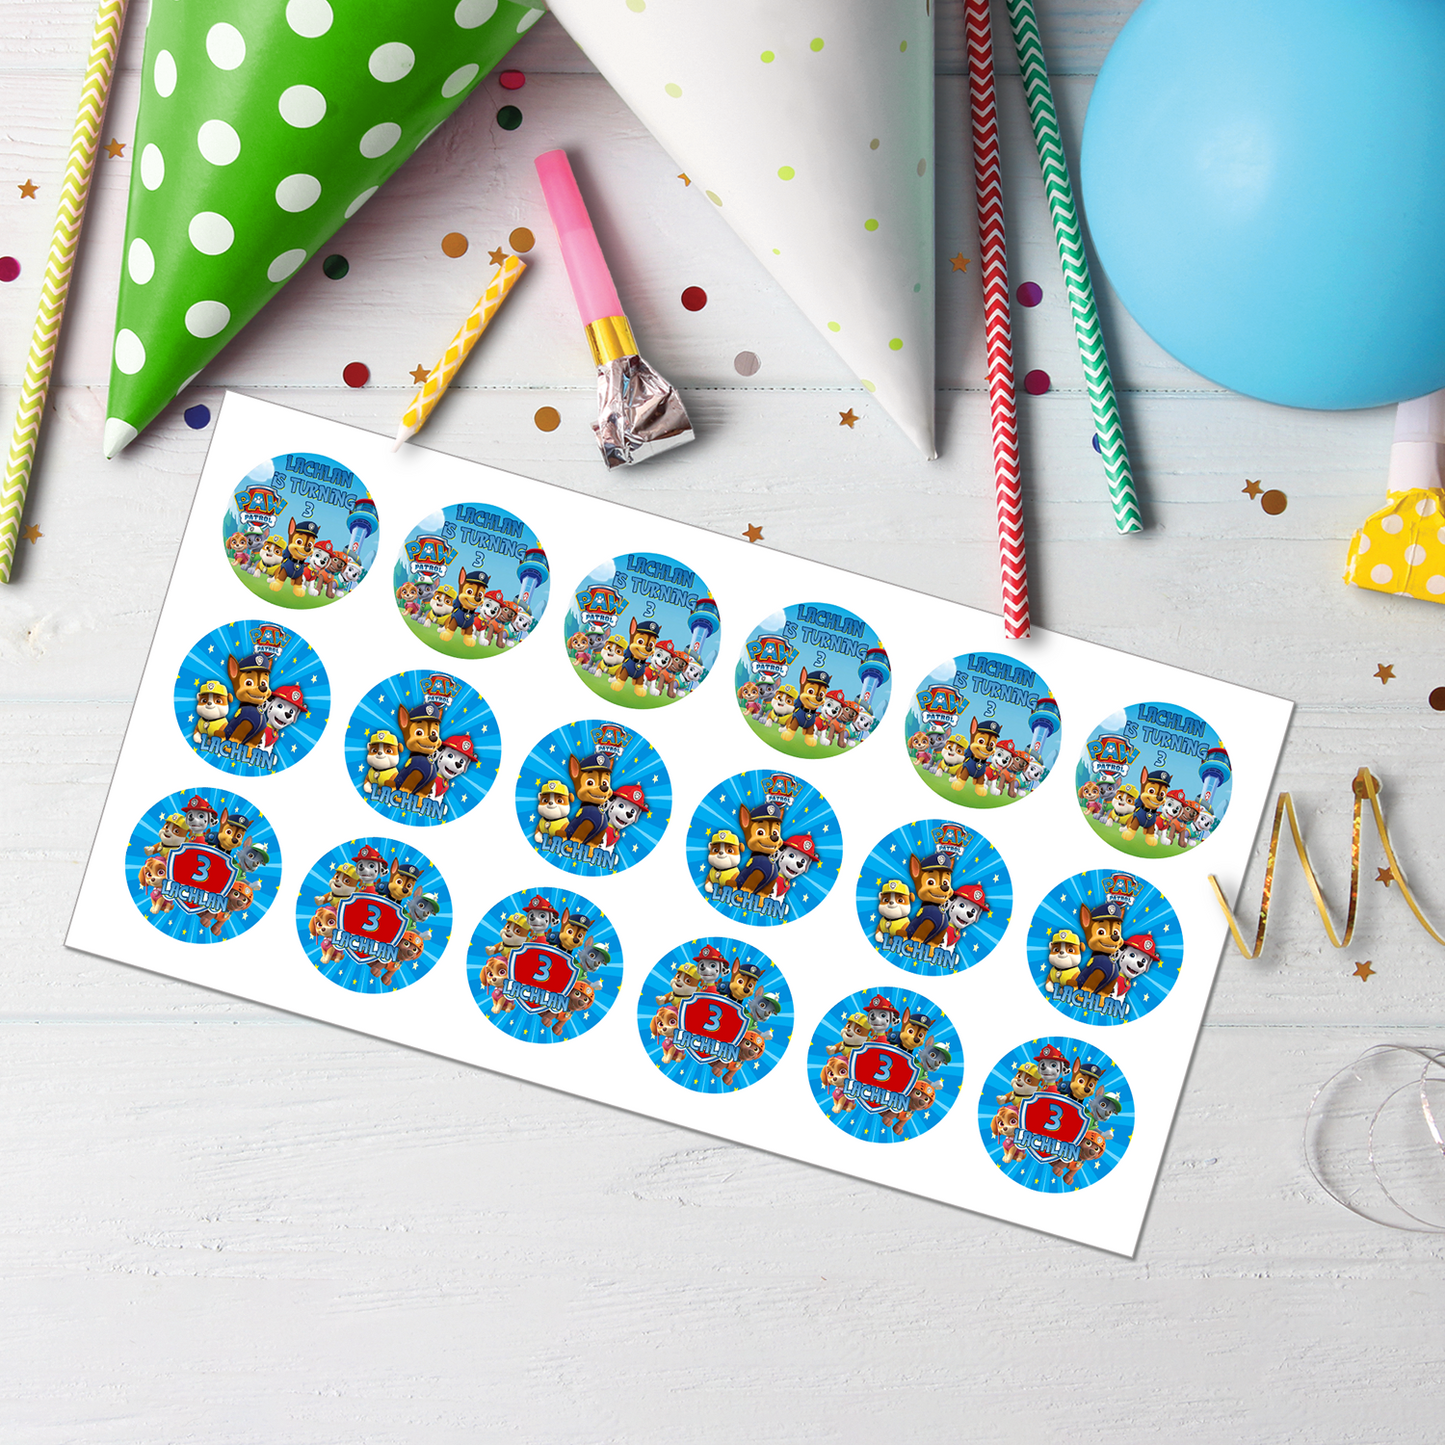 Paw Patrol Personalized Cupcakes Toppers : Add Fun to Your Party